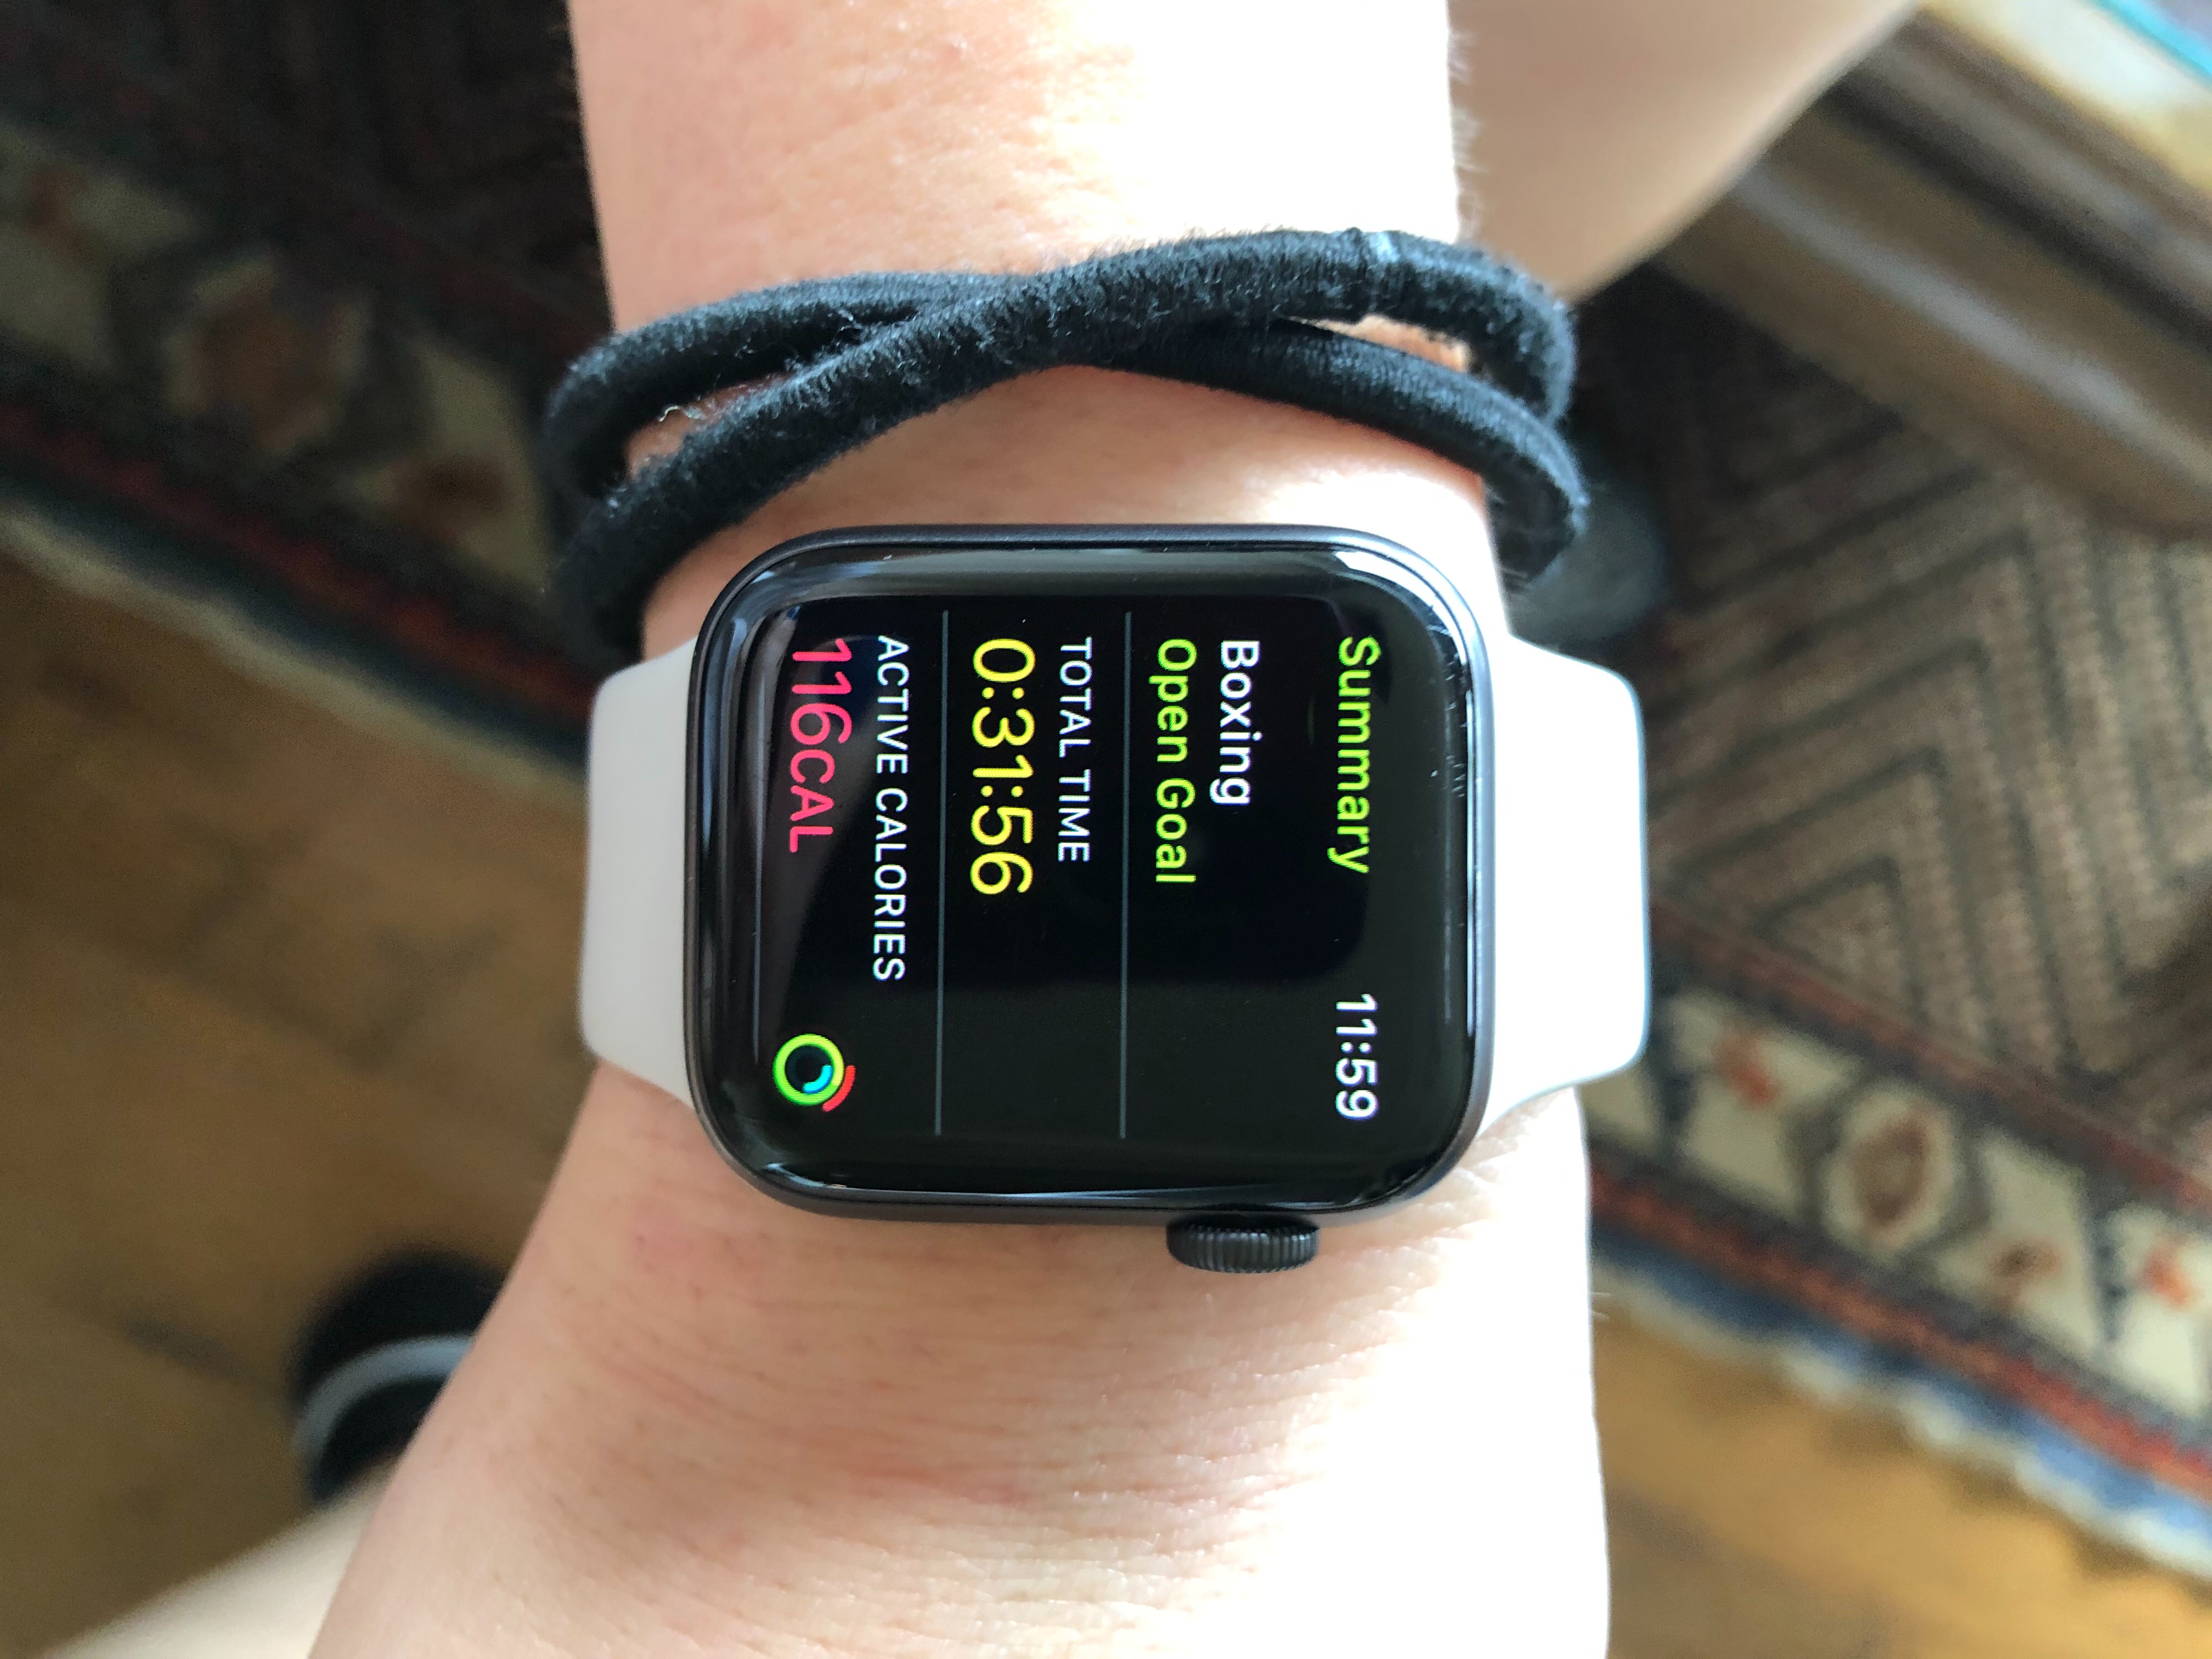 My watch is not tracking my workout accur…